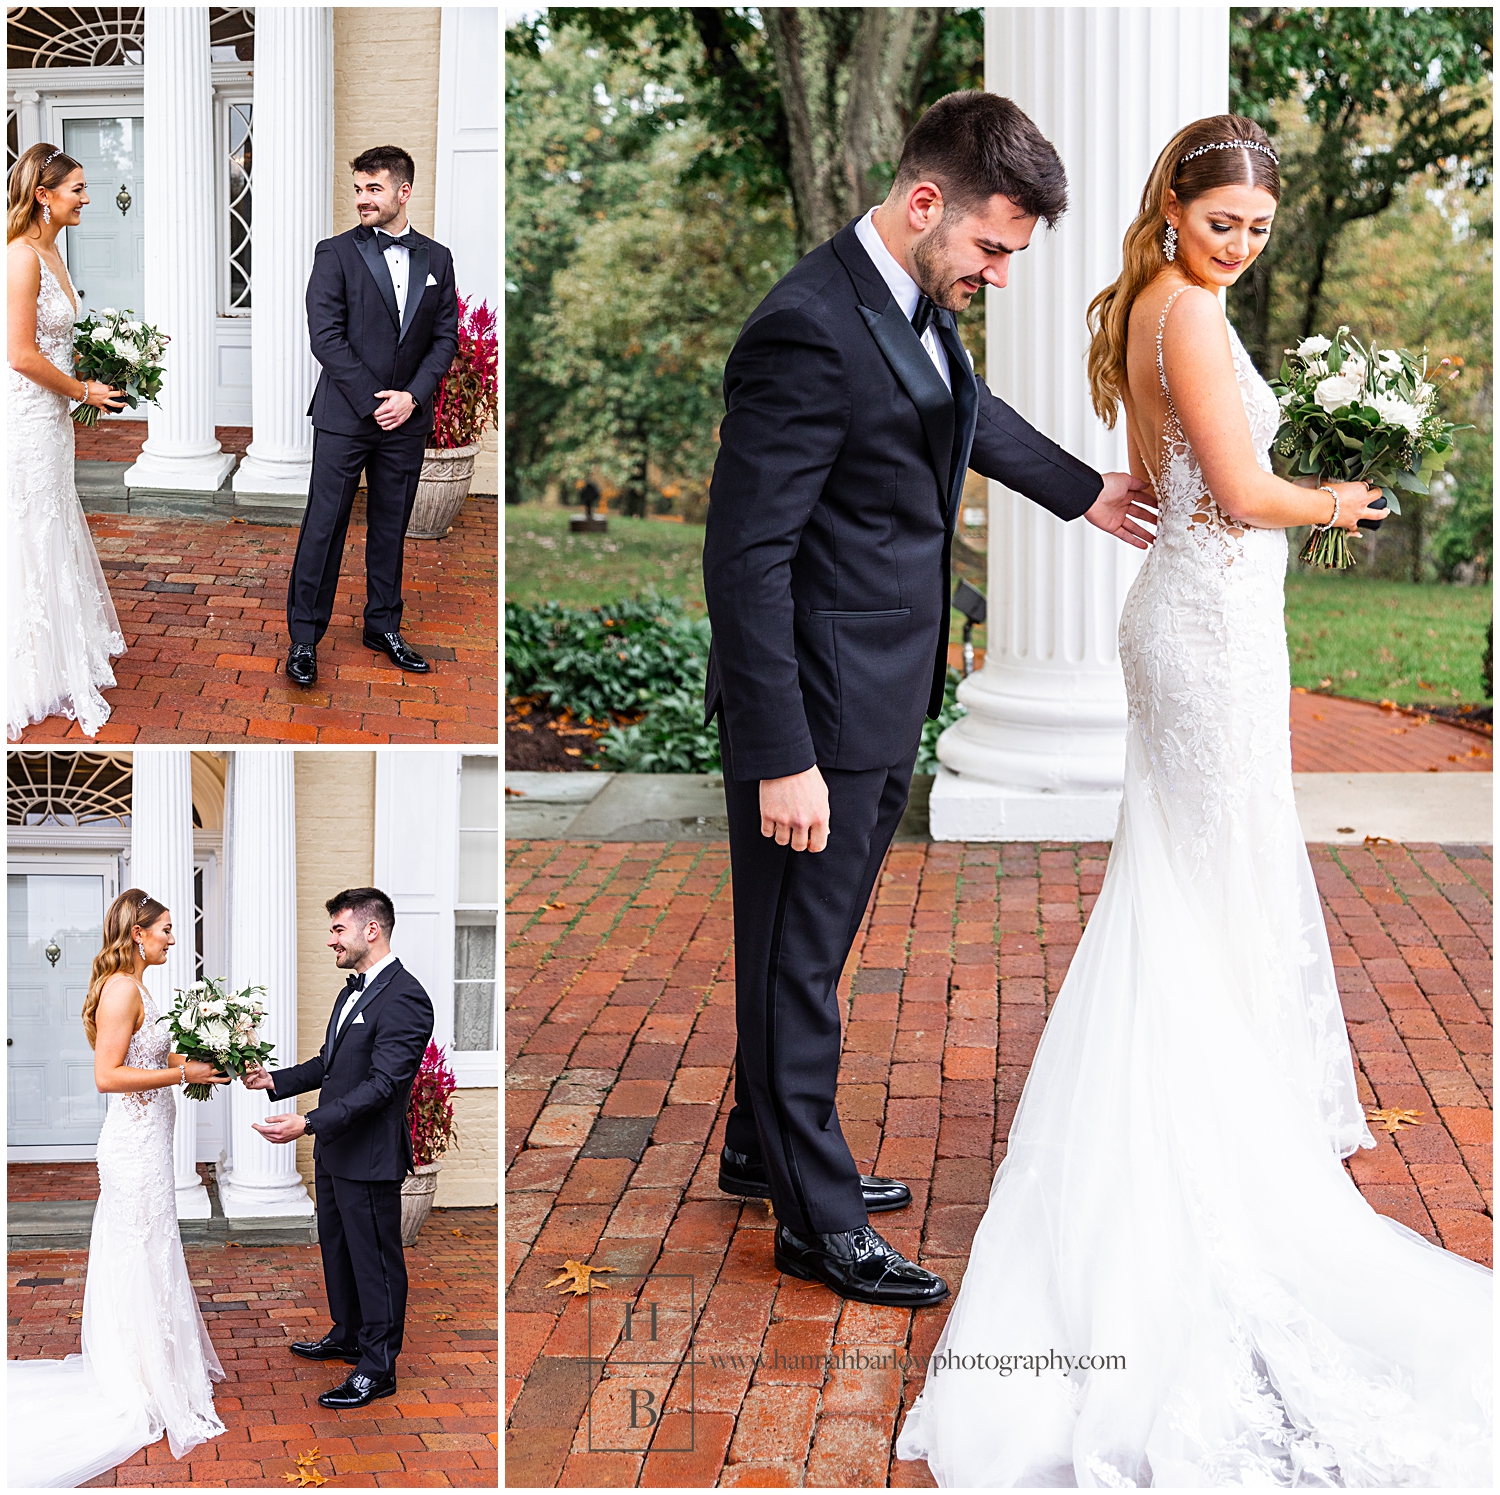 Grooms sees bride for first time and checks out dress details.